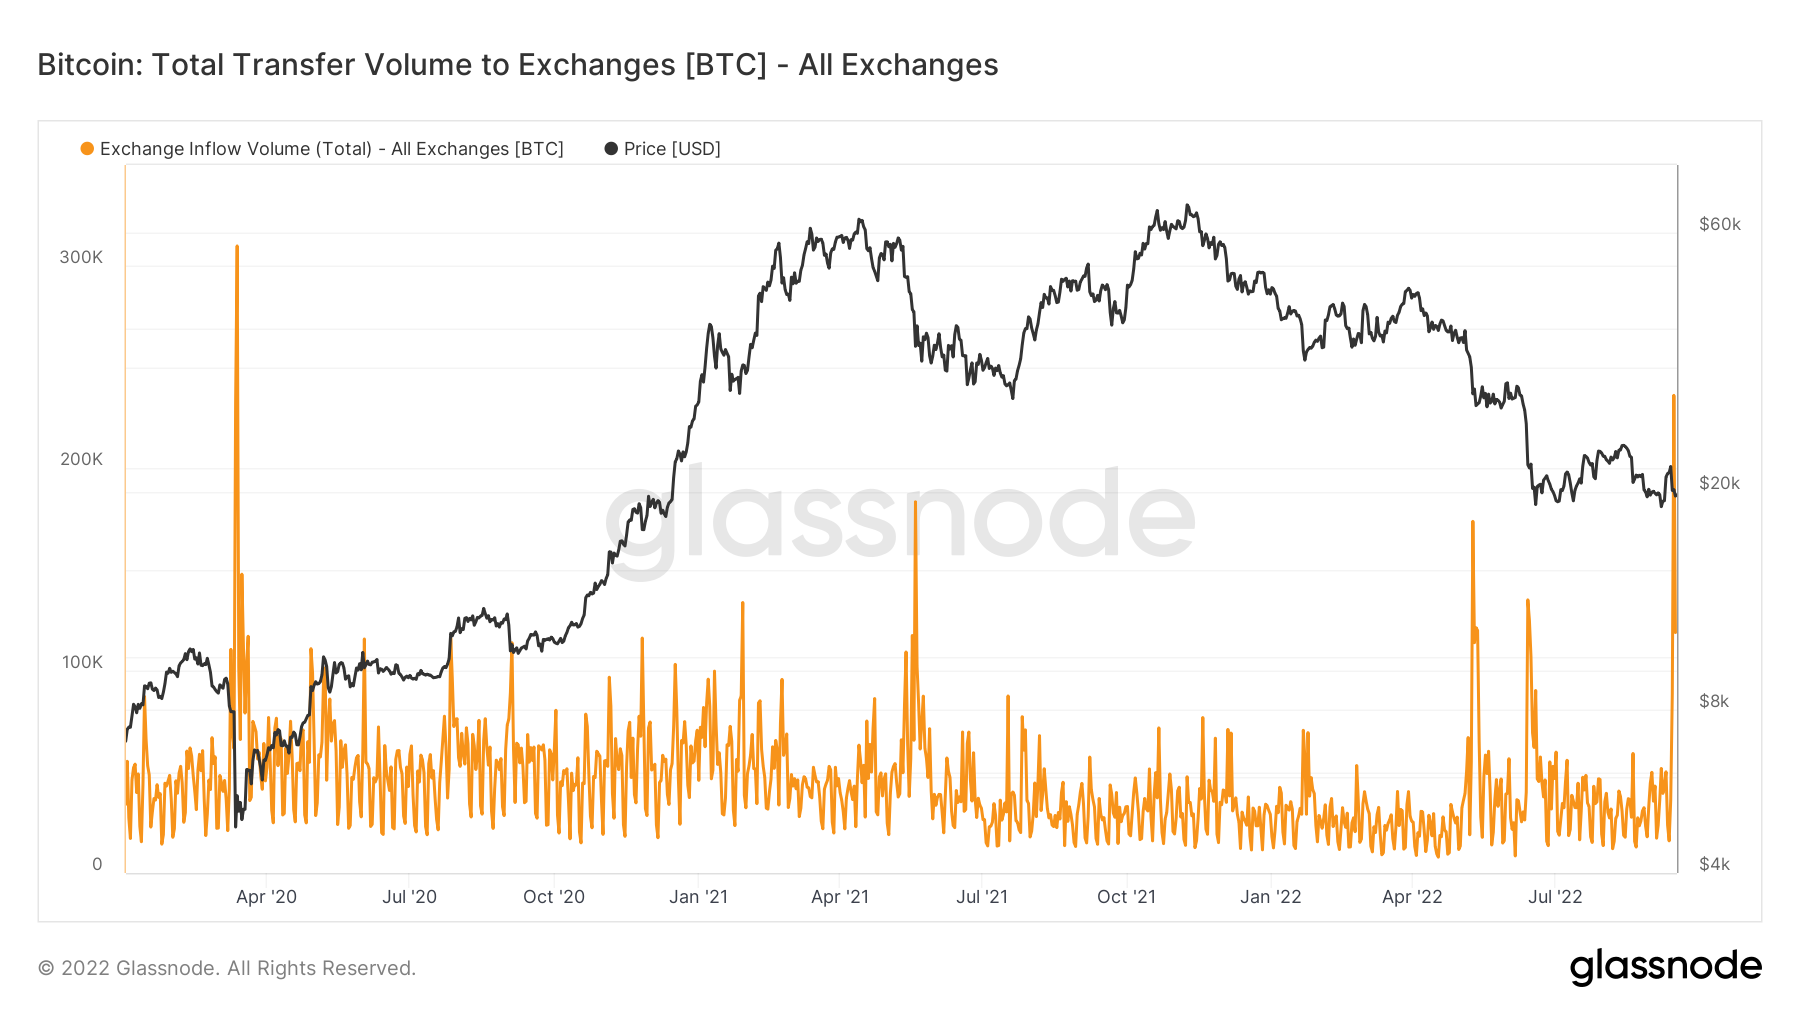 Bitcoin exchange inflows see biggest one-day spike since March 2020